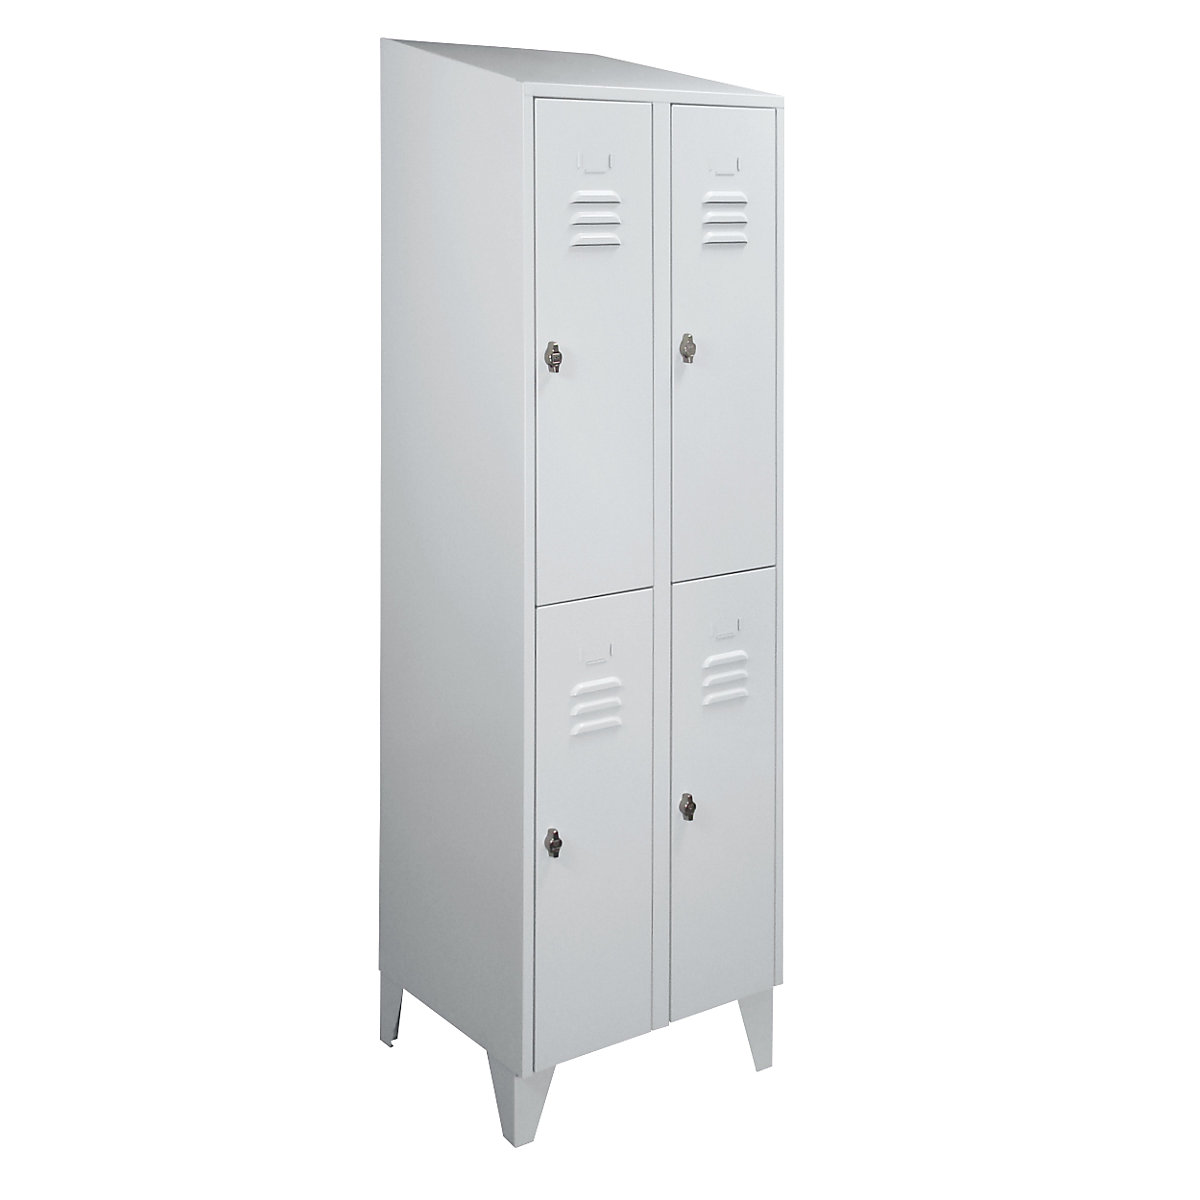 Cloakroom locker with sloping roof, half-height compartments – Wolf, total width 600 mm, 4 compartments, light grey RAL 7035-3